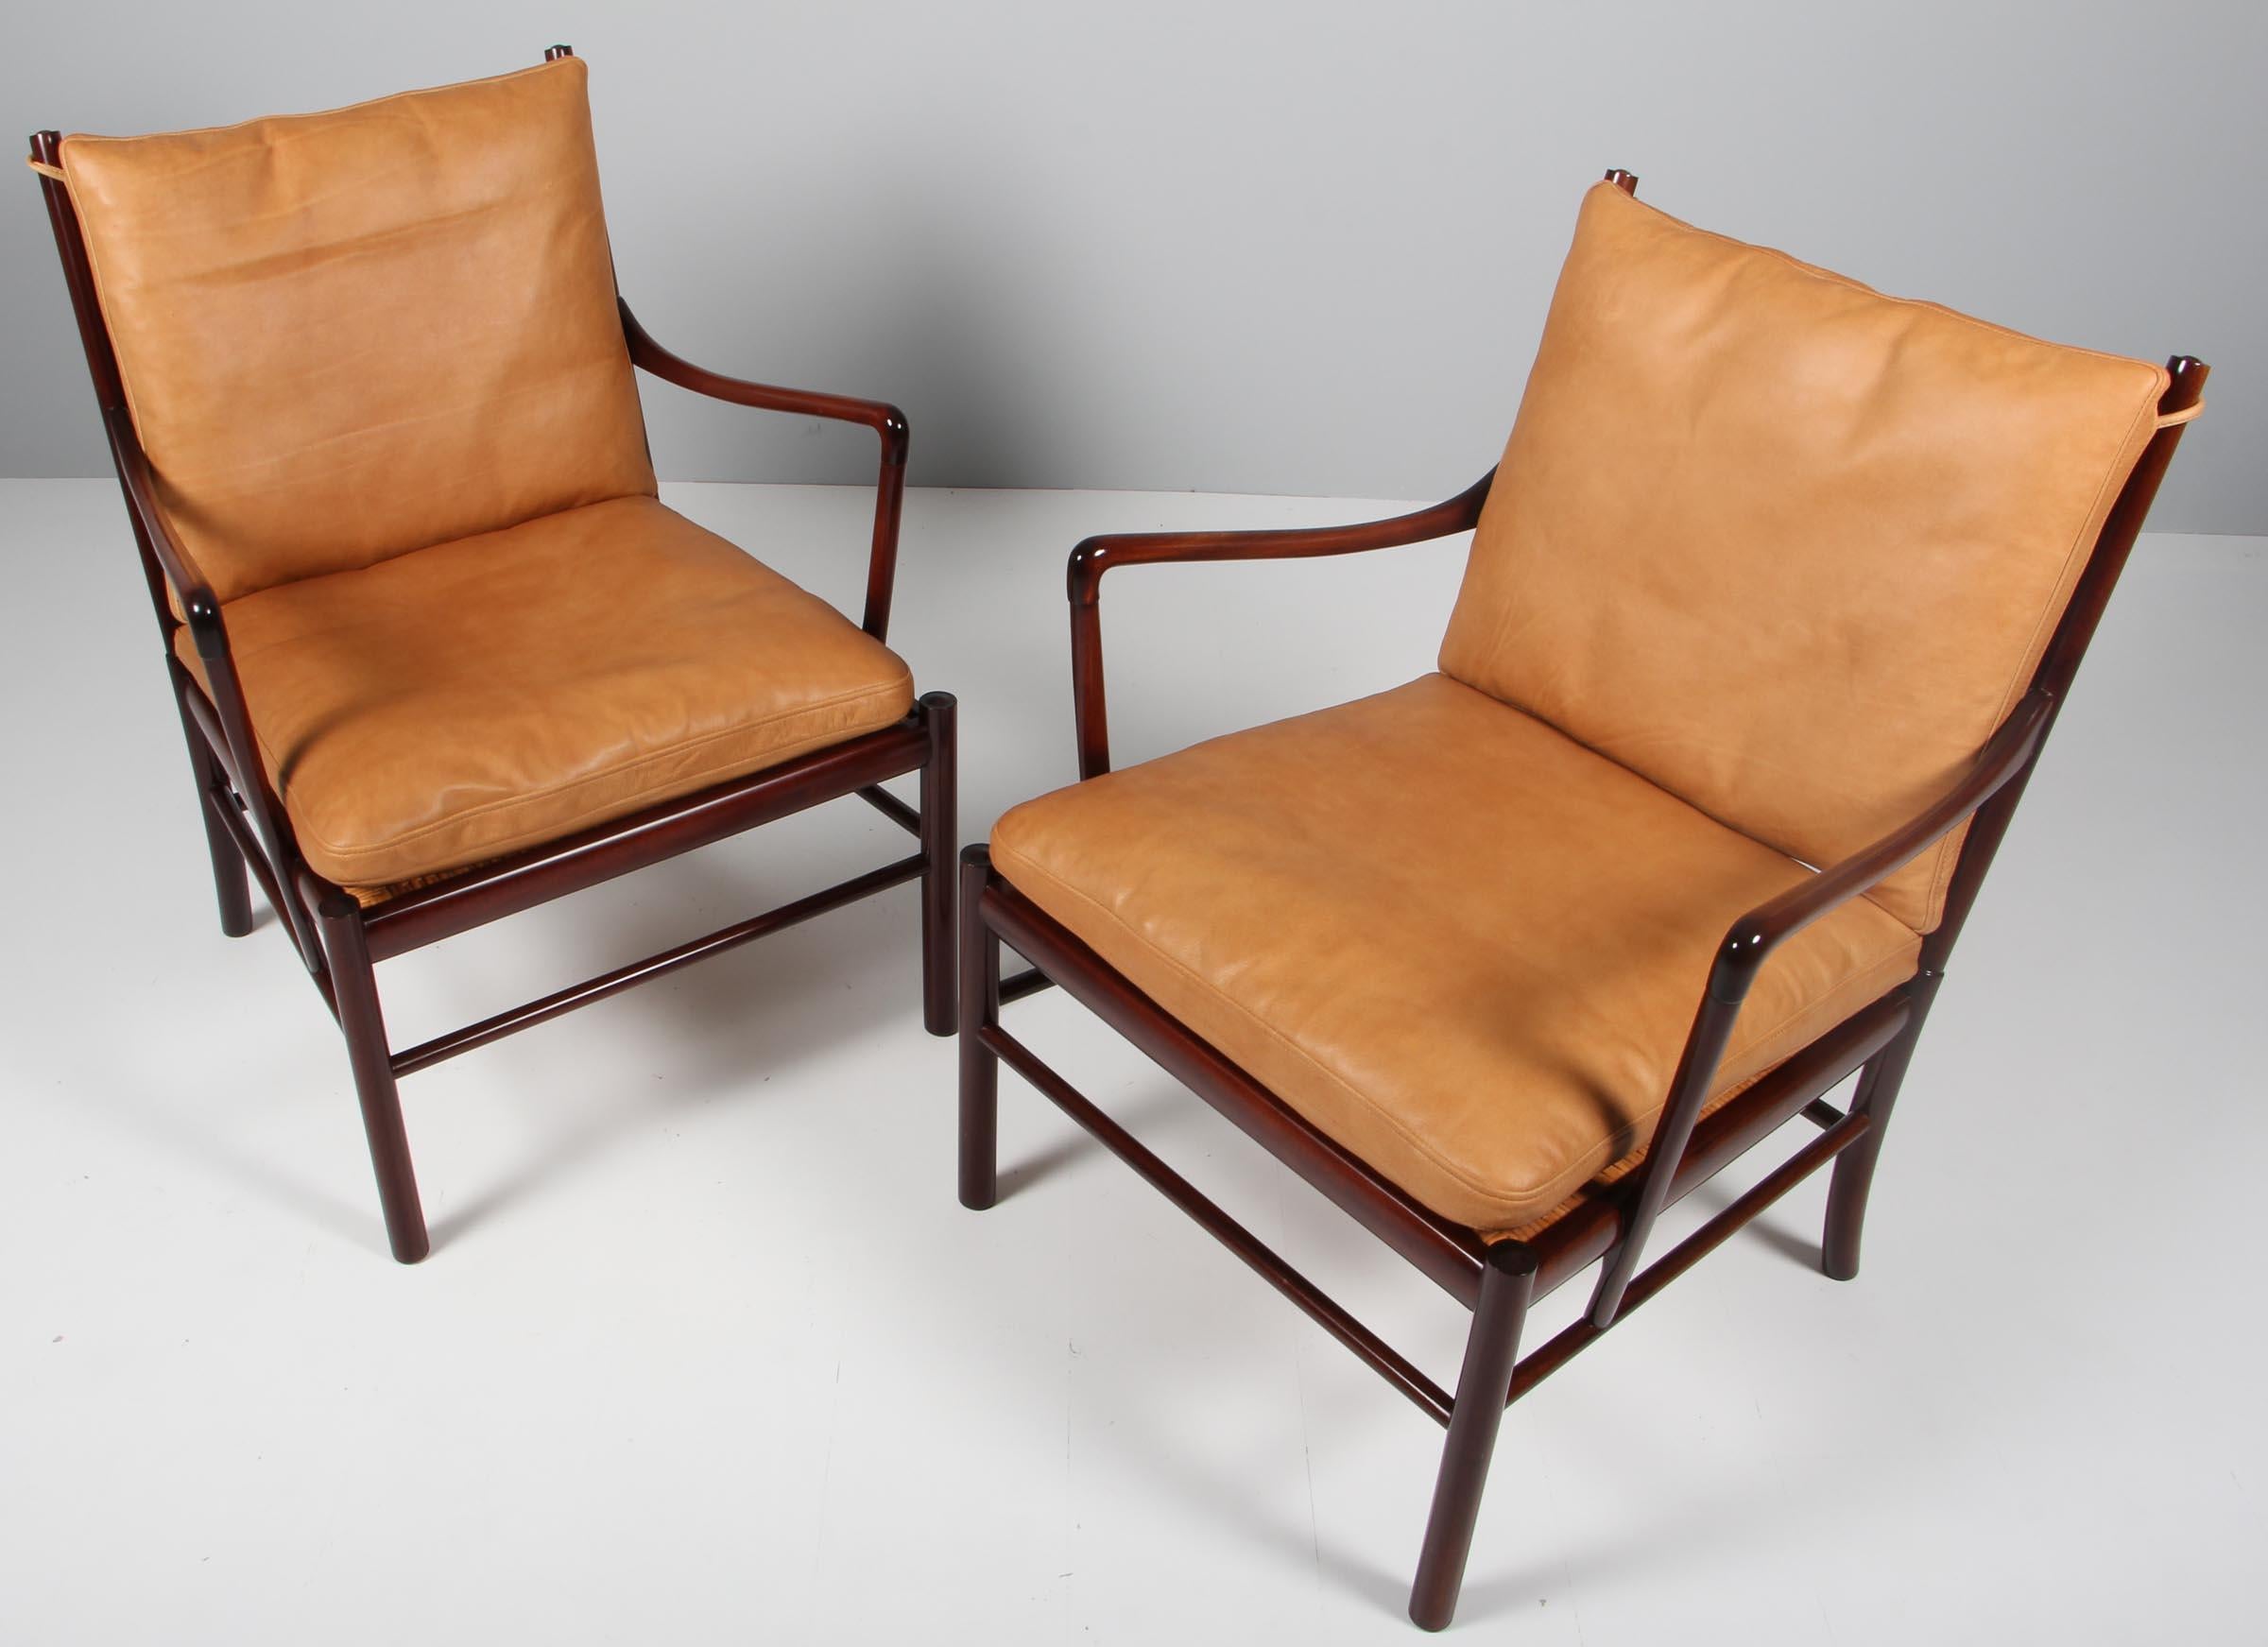 Ole Wanscher lounge chairs new upholstered with cognac aniline leather.

Made in mahogany.

Model PJ149 colonial chair, made by Poul jeppesen.